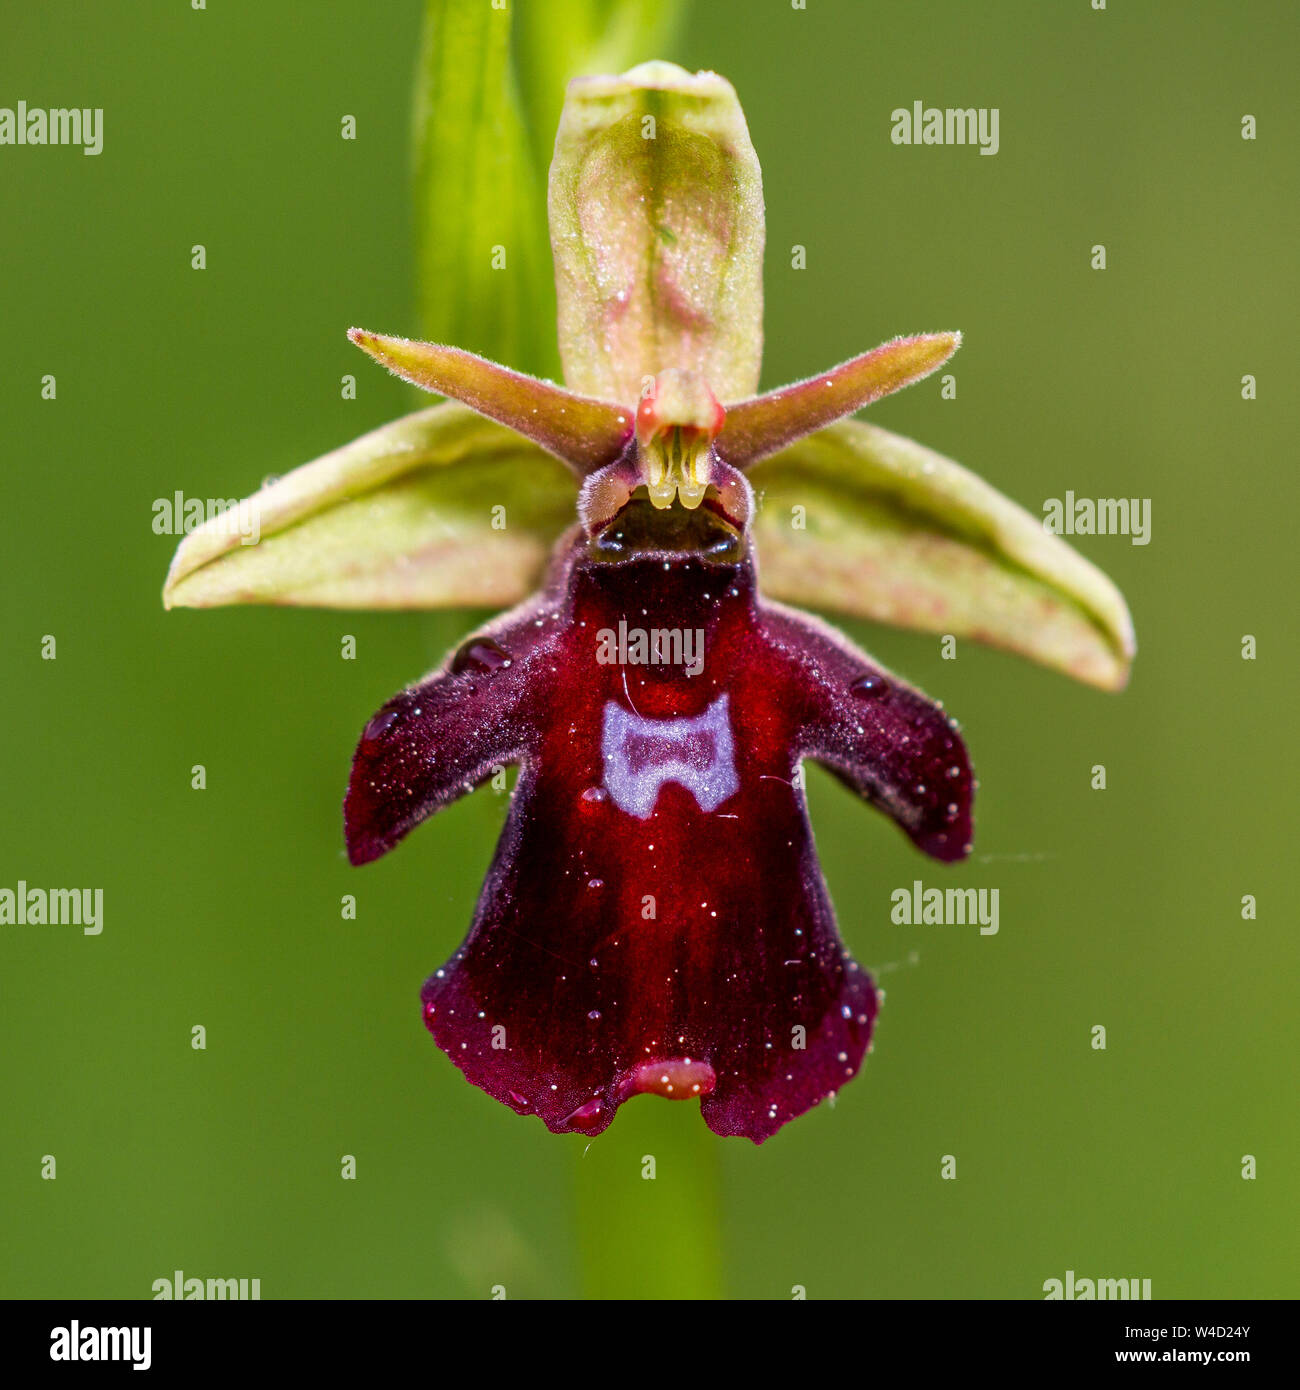 Ophrys insectifera, l'orchidée mouche Fliegen, Ragwurz (Ophrys insectifera) Banque D'Images